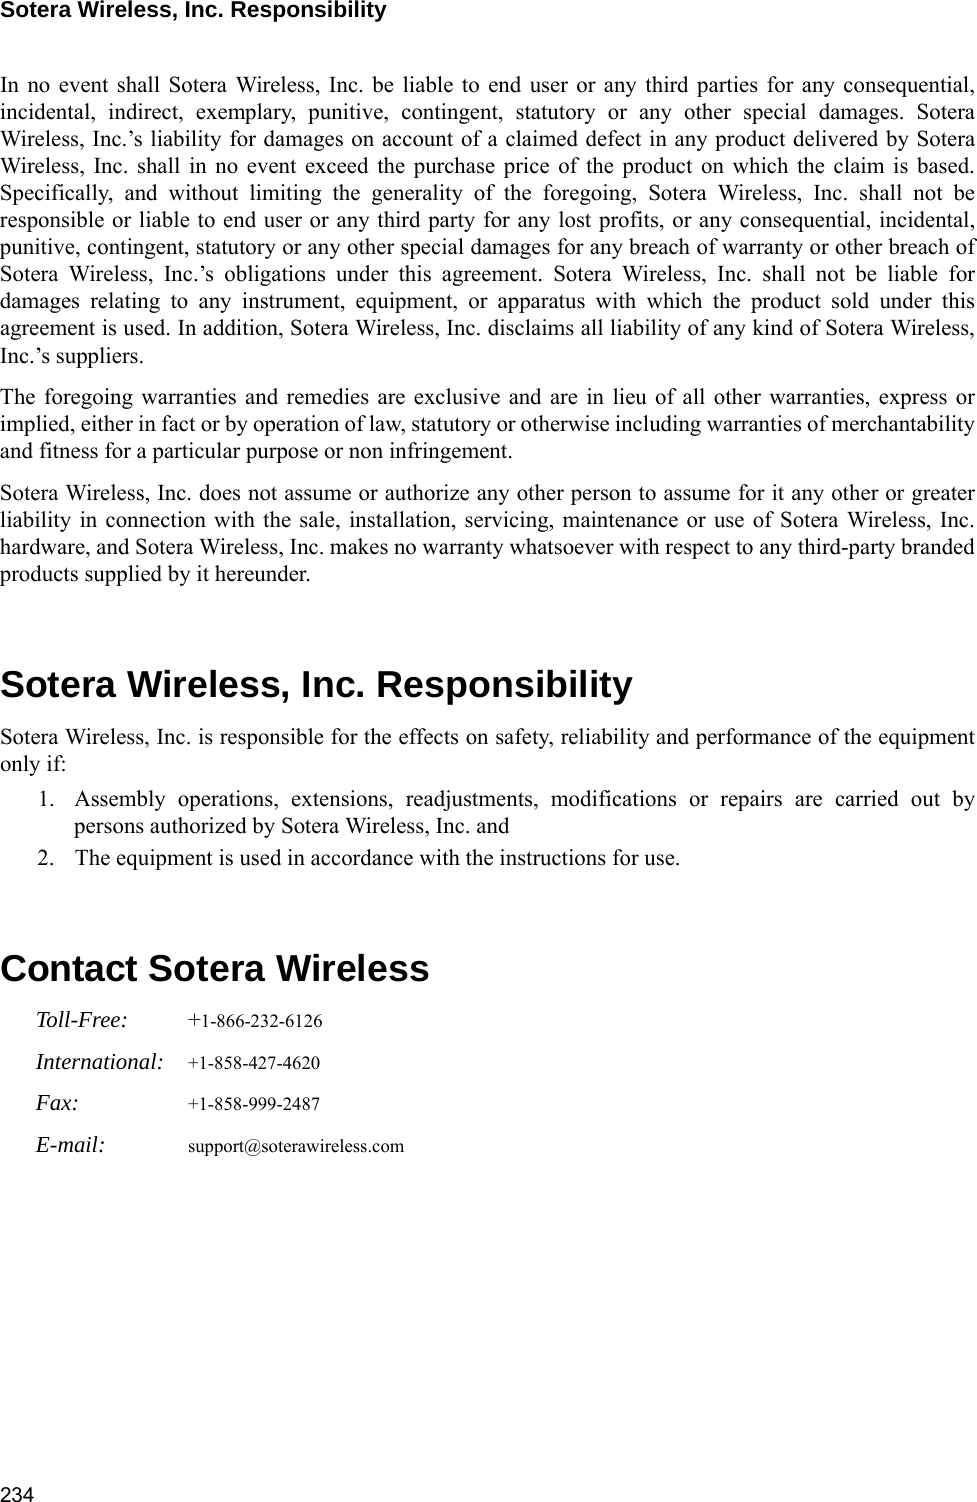 Sotera Wireless, Inc. Responsibility 234In no event shall Sotera Wireless, Inc. be liable to end user or any third parties for any consequential,incidental, indirect, exemplary, punitive, contingent, statutory or any other special damages. SoteraWireless, Inc.’s liability for damages on account of a claimed defect in any product delivered by SoteraWireless, Inc. shall in no event exceed the purchase price of the product on which the claim is based.Specifically, and without limiting the generality of the foregoing, Sotera Wireless, Inc. shall not beresponsible or liable to end user or any third party for any lost profits, or any consequential, incidental,punitive, contingent, statutory or any other special damages for any breach of warranty or other breach ofSotera Wireless, Inc.’s obligations under this agreement. Sotera Wireless, Inc. shall not be liable fordamages relating to any instrument, equipment, or apparatus with which the product sold under thisagreement is used. In addition, Sotera Wireless, Inc. disclaims all liability of any kind of Sotera Wireless,Inc.’s suppliers.The foregoing warranties and remedies are exclusive and are in lieu of all other warranties, express orimplied, either in fact or by operation of law, statutory or otherwise including warranties of merchantabilityand fitness for a particular purpose or non infringement. Sotera Wireless, Inc. does not assume or authorize any other person to assume for it any other or greaterliability in connection with the sale, installation, servicing, maintenance or use of Sotera Wireless, Inc.hardware, and Sotera Wireless, Inc. makes no warranty whatsoever with respect to any third-party brandedproducts supplied by it hereunder.Sotera Wireless, Inc. ResponsibilitySotera Wireless, Inc. is responsible for the effects on safety, reliability and performance of the equipmentonly if:1. Assembly operations, extensions, readjustments, modifications or repairs are carried out bypersons authorized by Sotera Wireless, Inc. and2. The equipment is used in accordance with the instructions for use.Contact Sotera WirelessToll-Free: +1-866-232-6126International: +1-858-427-4620Fax: +1-858-999-2487E-mail: support@soterawireless.com